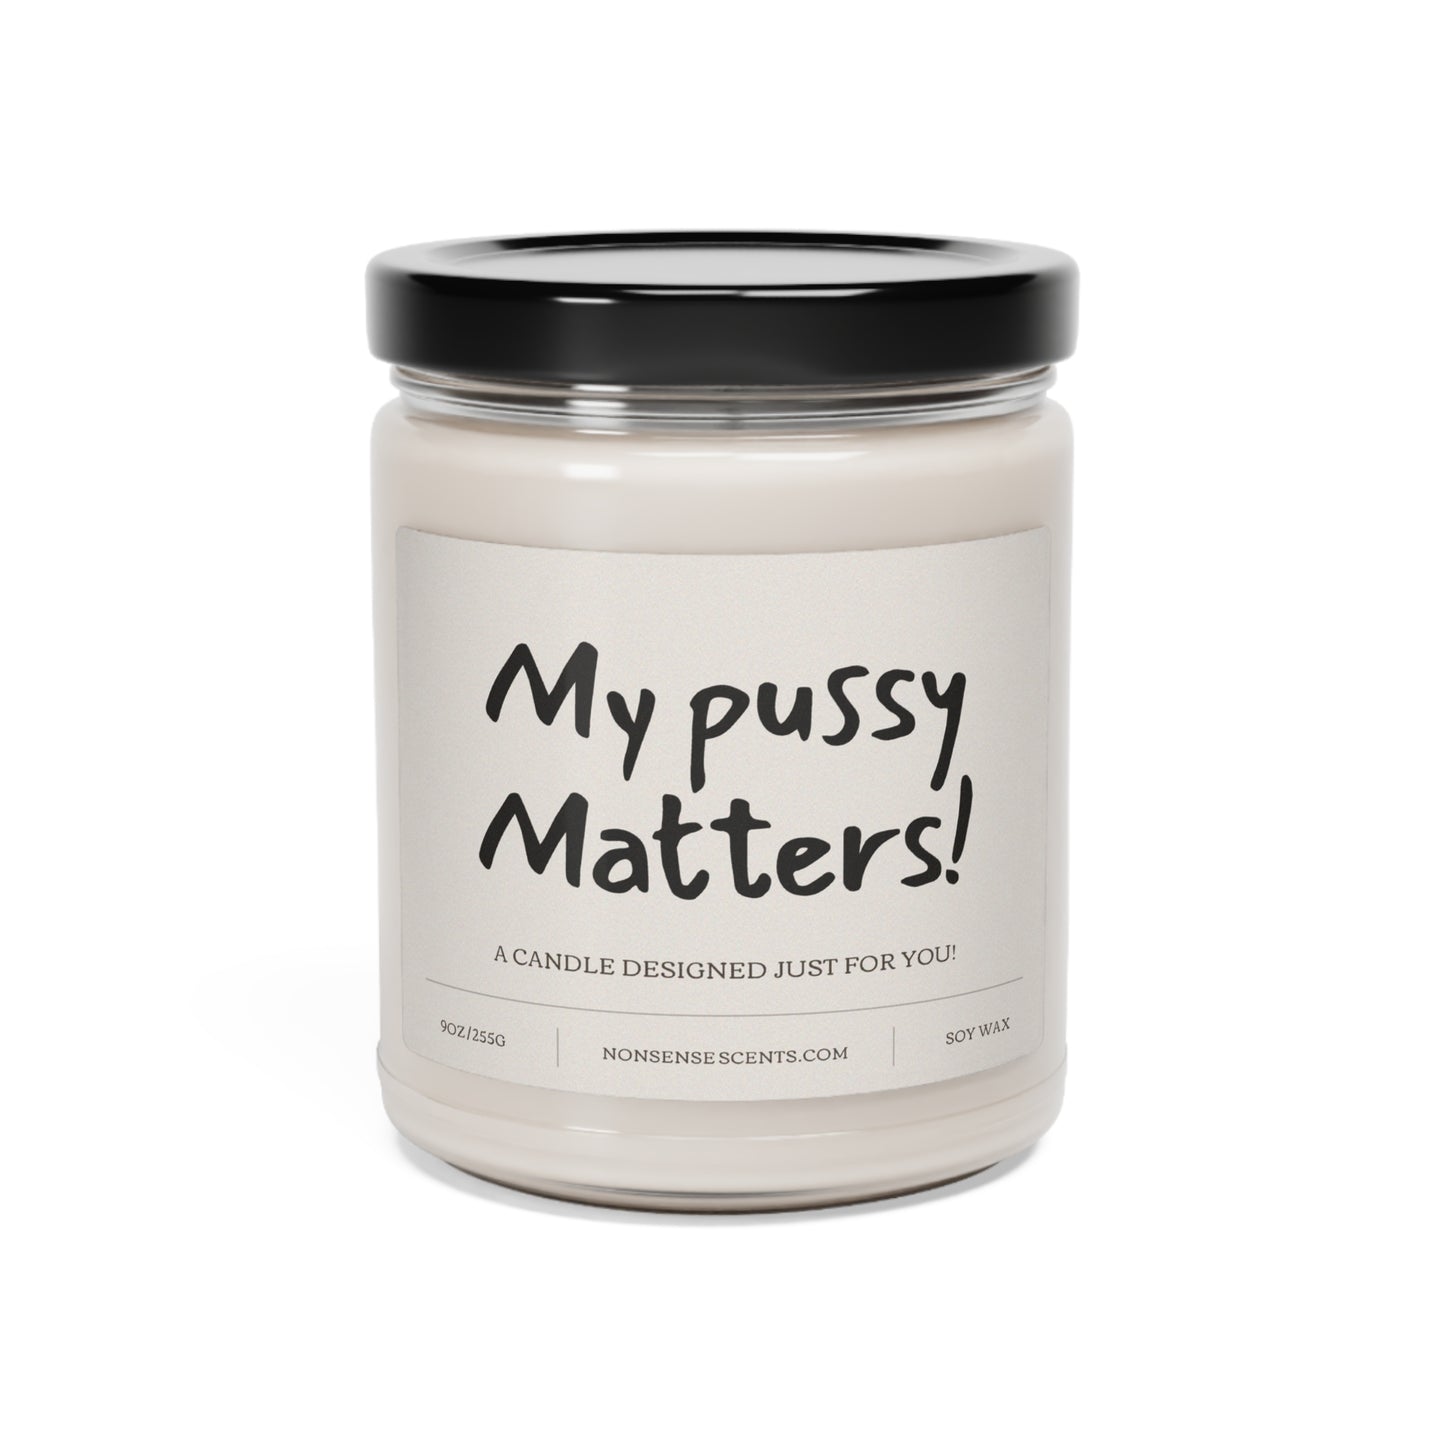 "My Pussy Matters!" Scented Candle